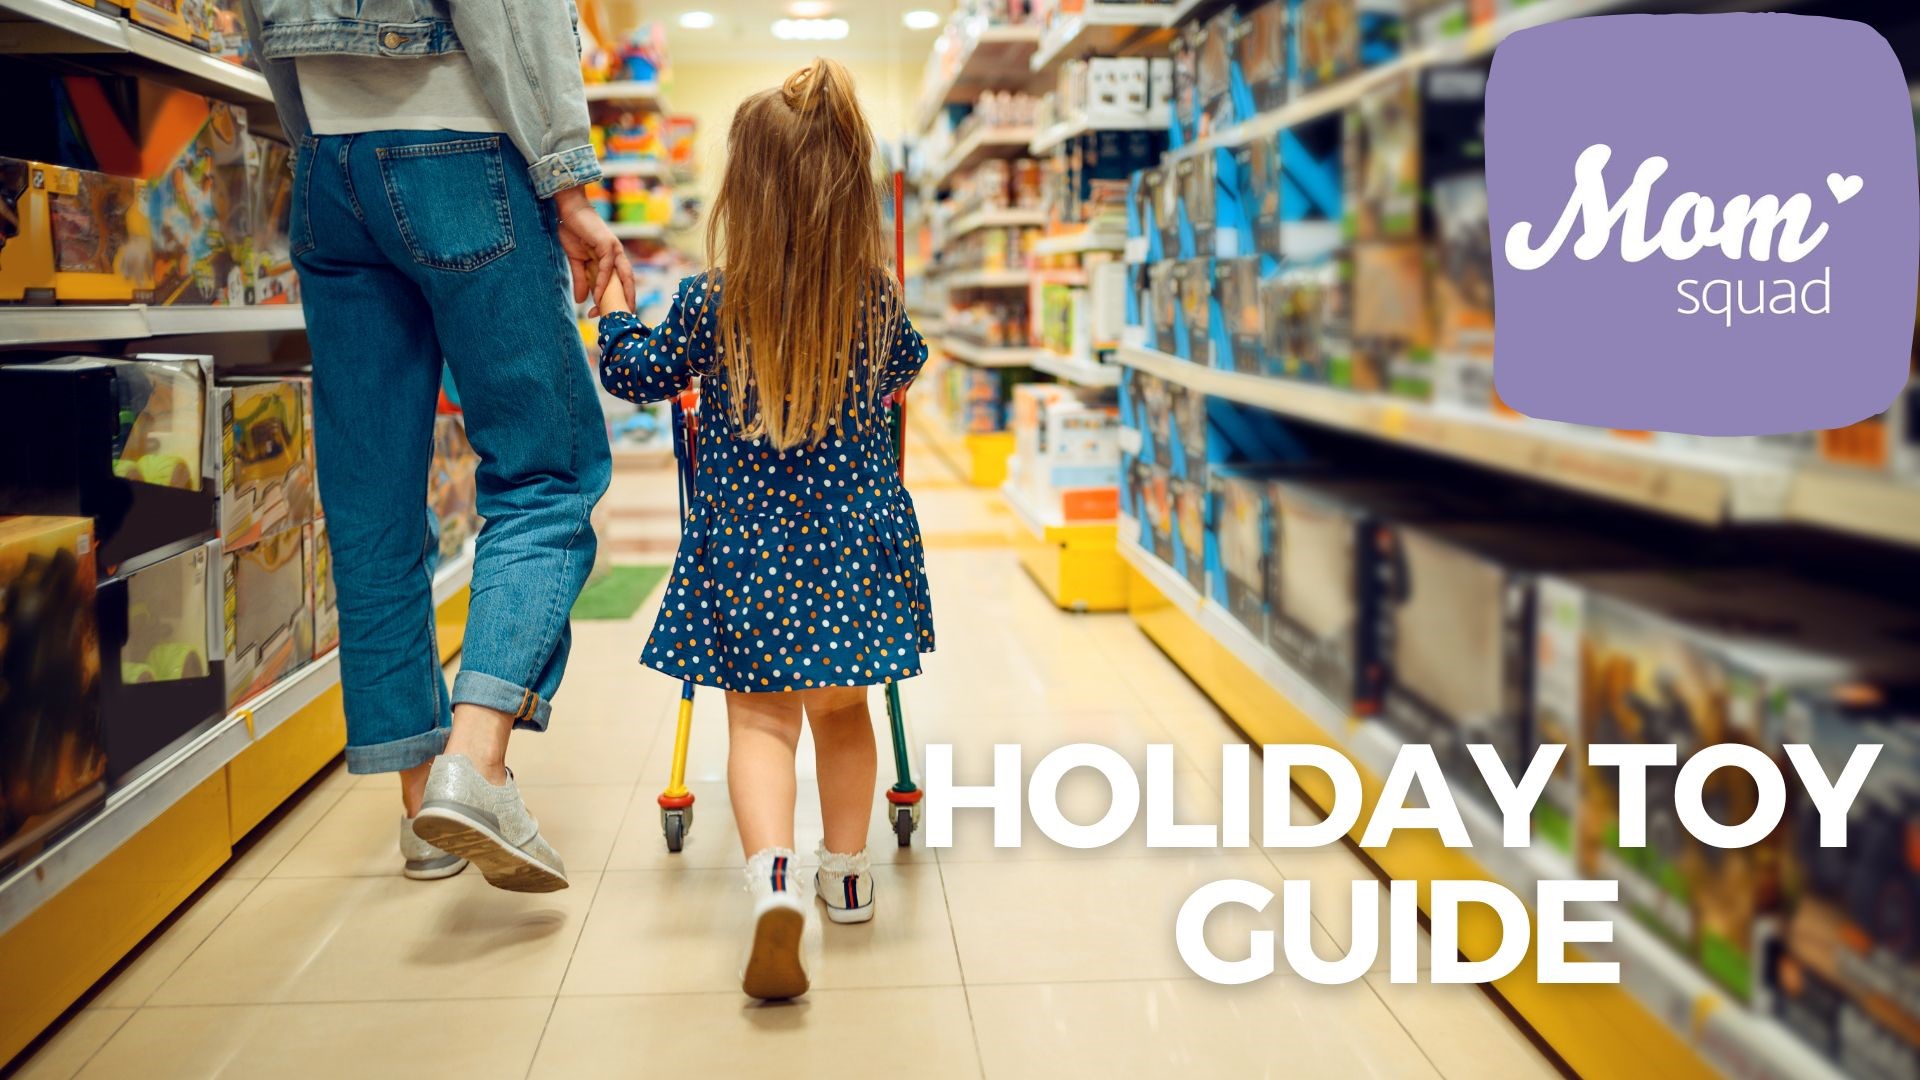 Maureen Kyle talks with the editor-in-chief of Toy Insider to learn the hottest toys of 2023. Plus, she shares her favorite budget-friendly toys for the holidays.